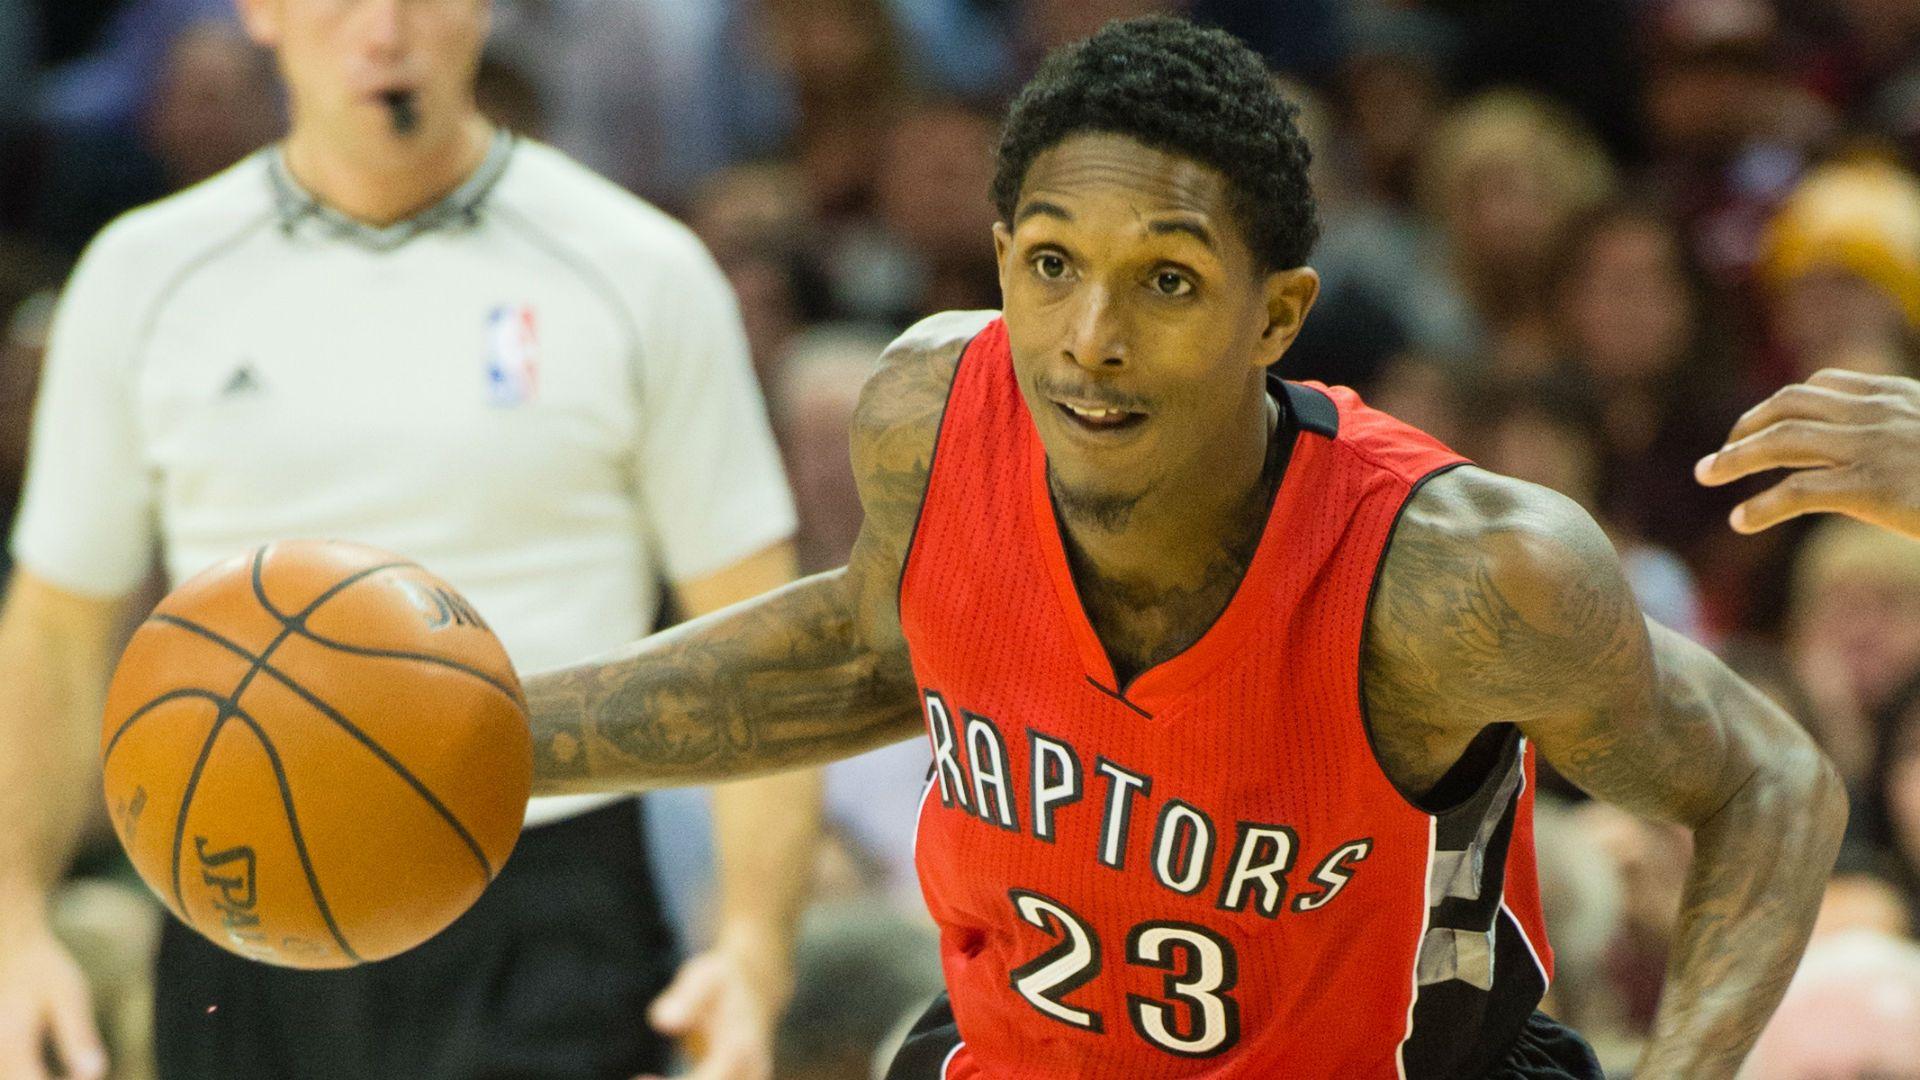 Toronto never offered Lou Williams a deal, according to his